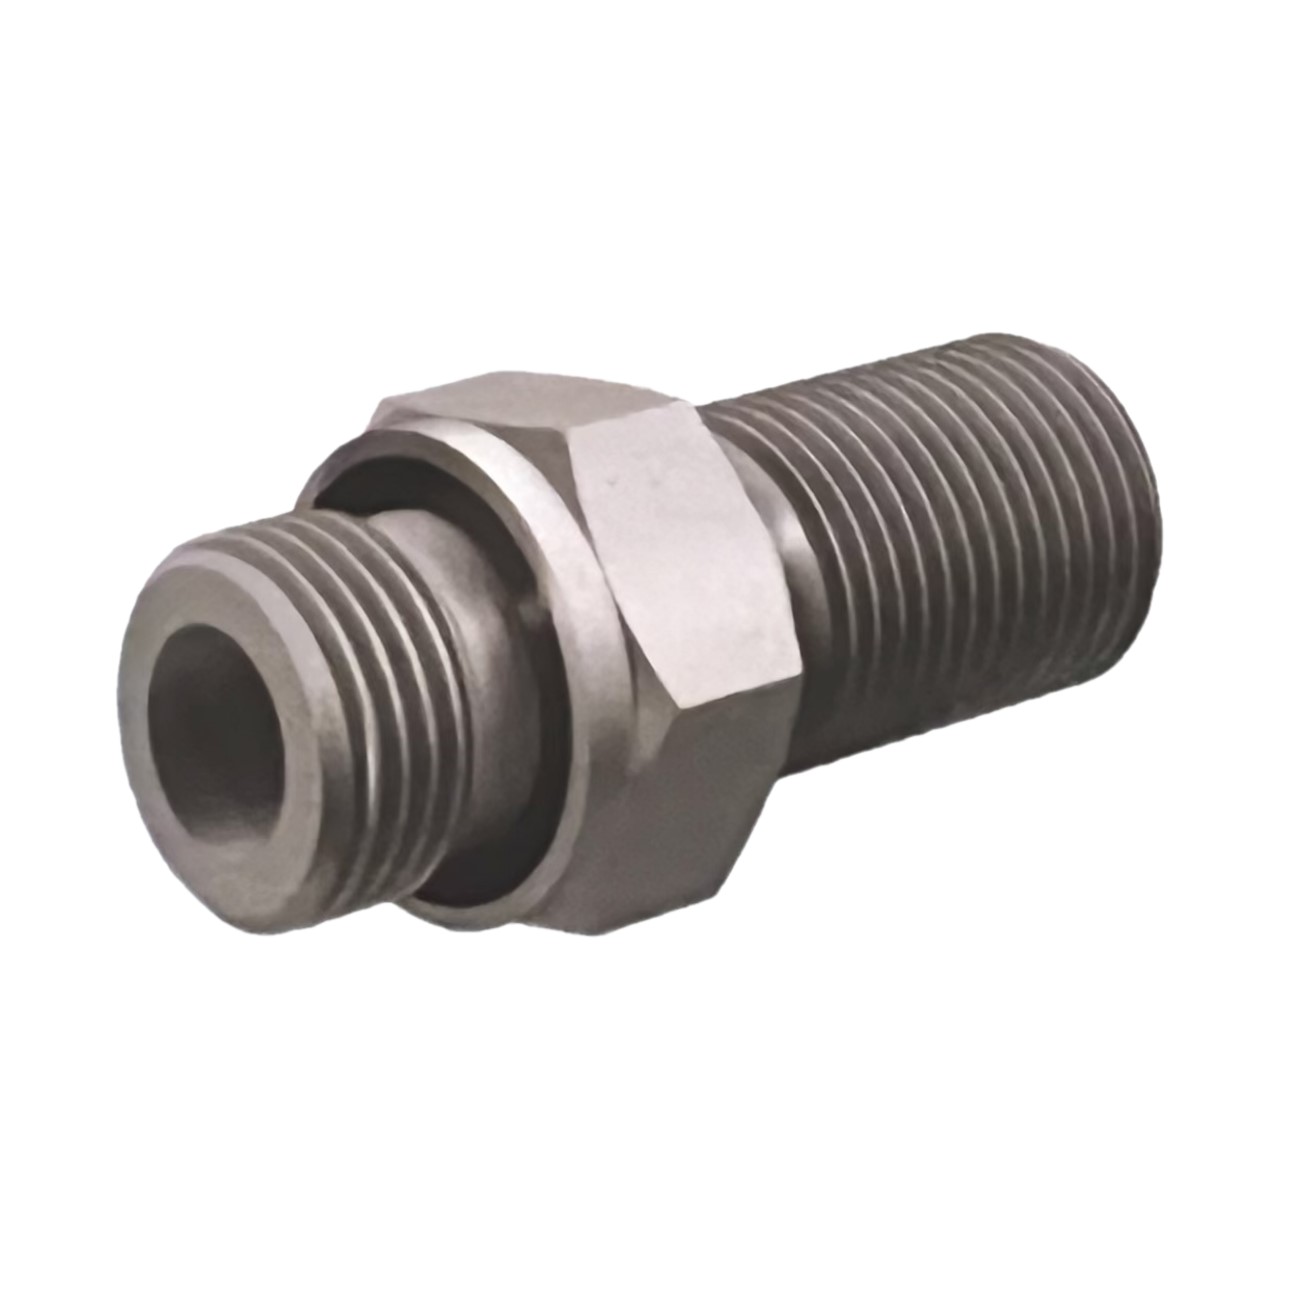 BSP MALE CAPTIVE SEAL FOR 3869 X BSP MALE BULKHEAD ONLY COMPLETE WITH SEAL, 1/4" BSP (CS) X 1/4" BSP Hydraulic Adaptor